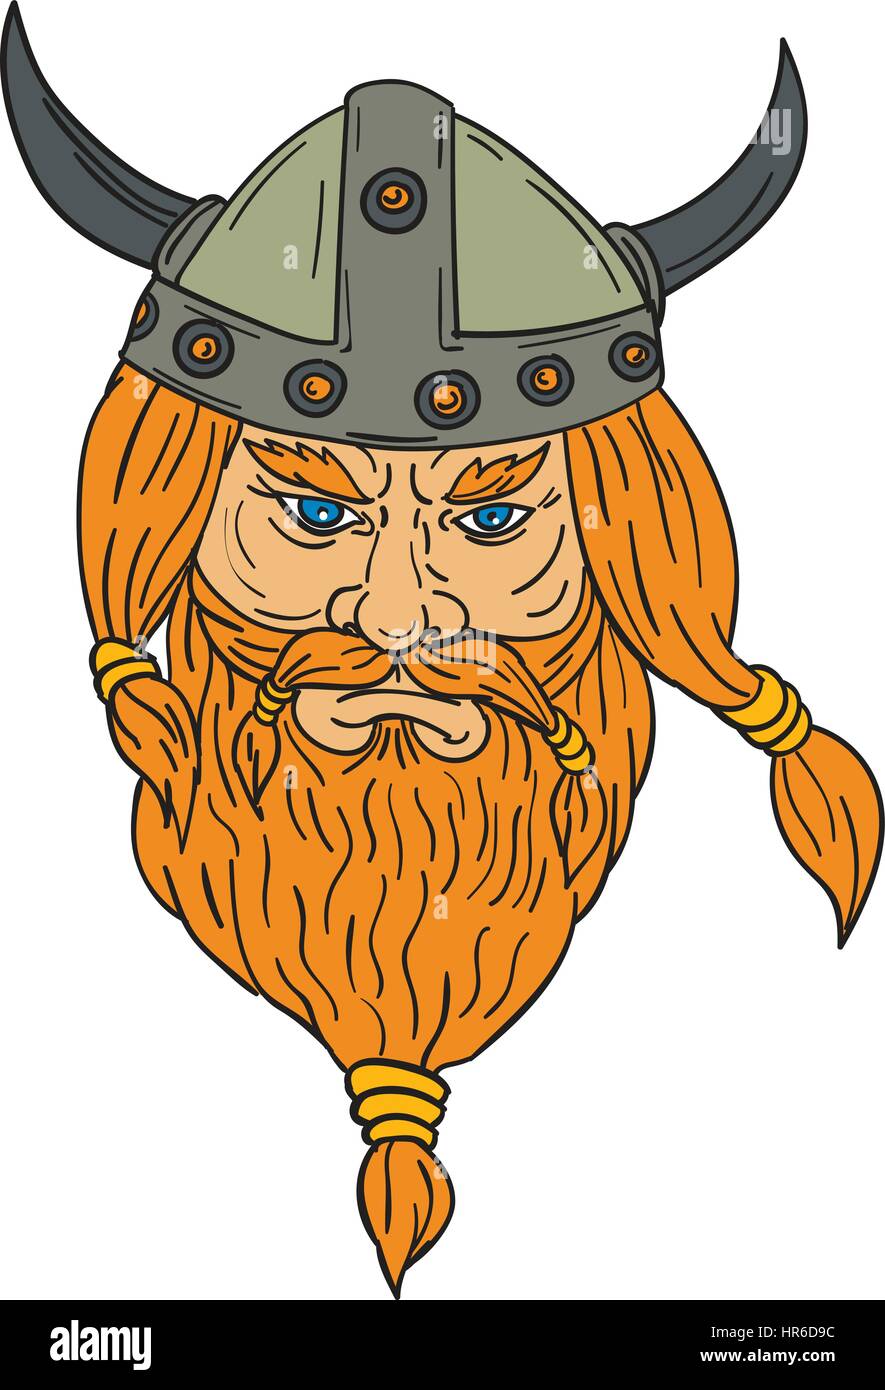 Drawing sketch style illustration of a norseman viking warrior raider barbarian head with beard viewed from front set on isolated white background. Stock Vector